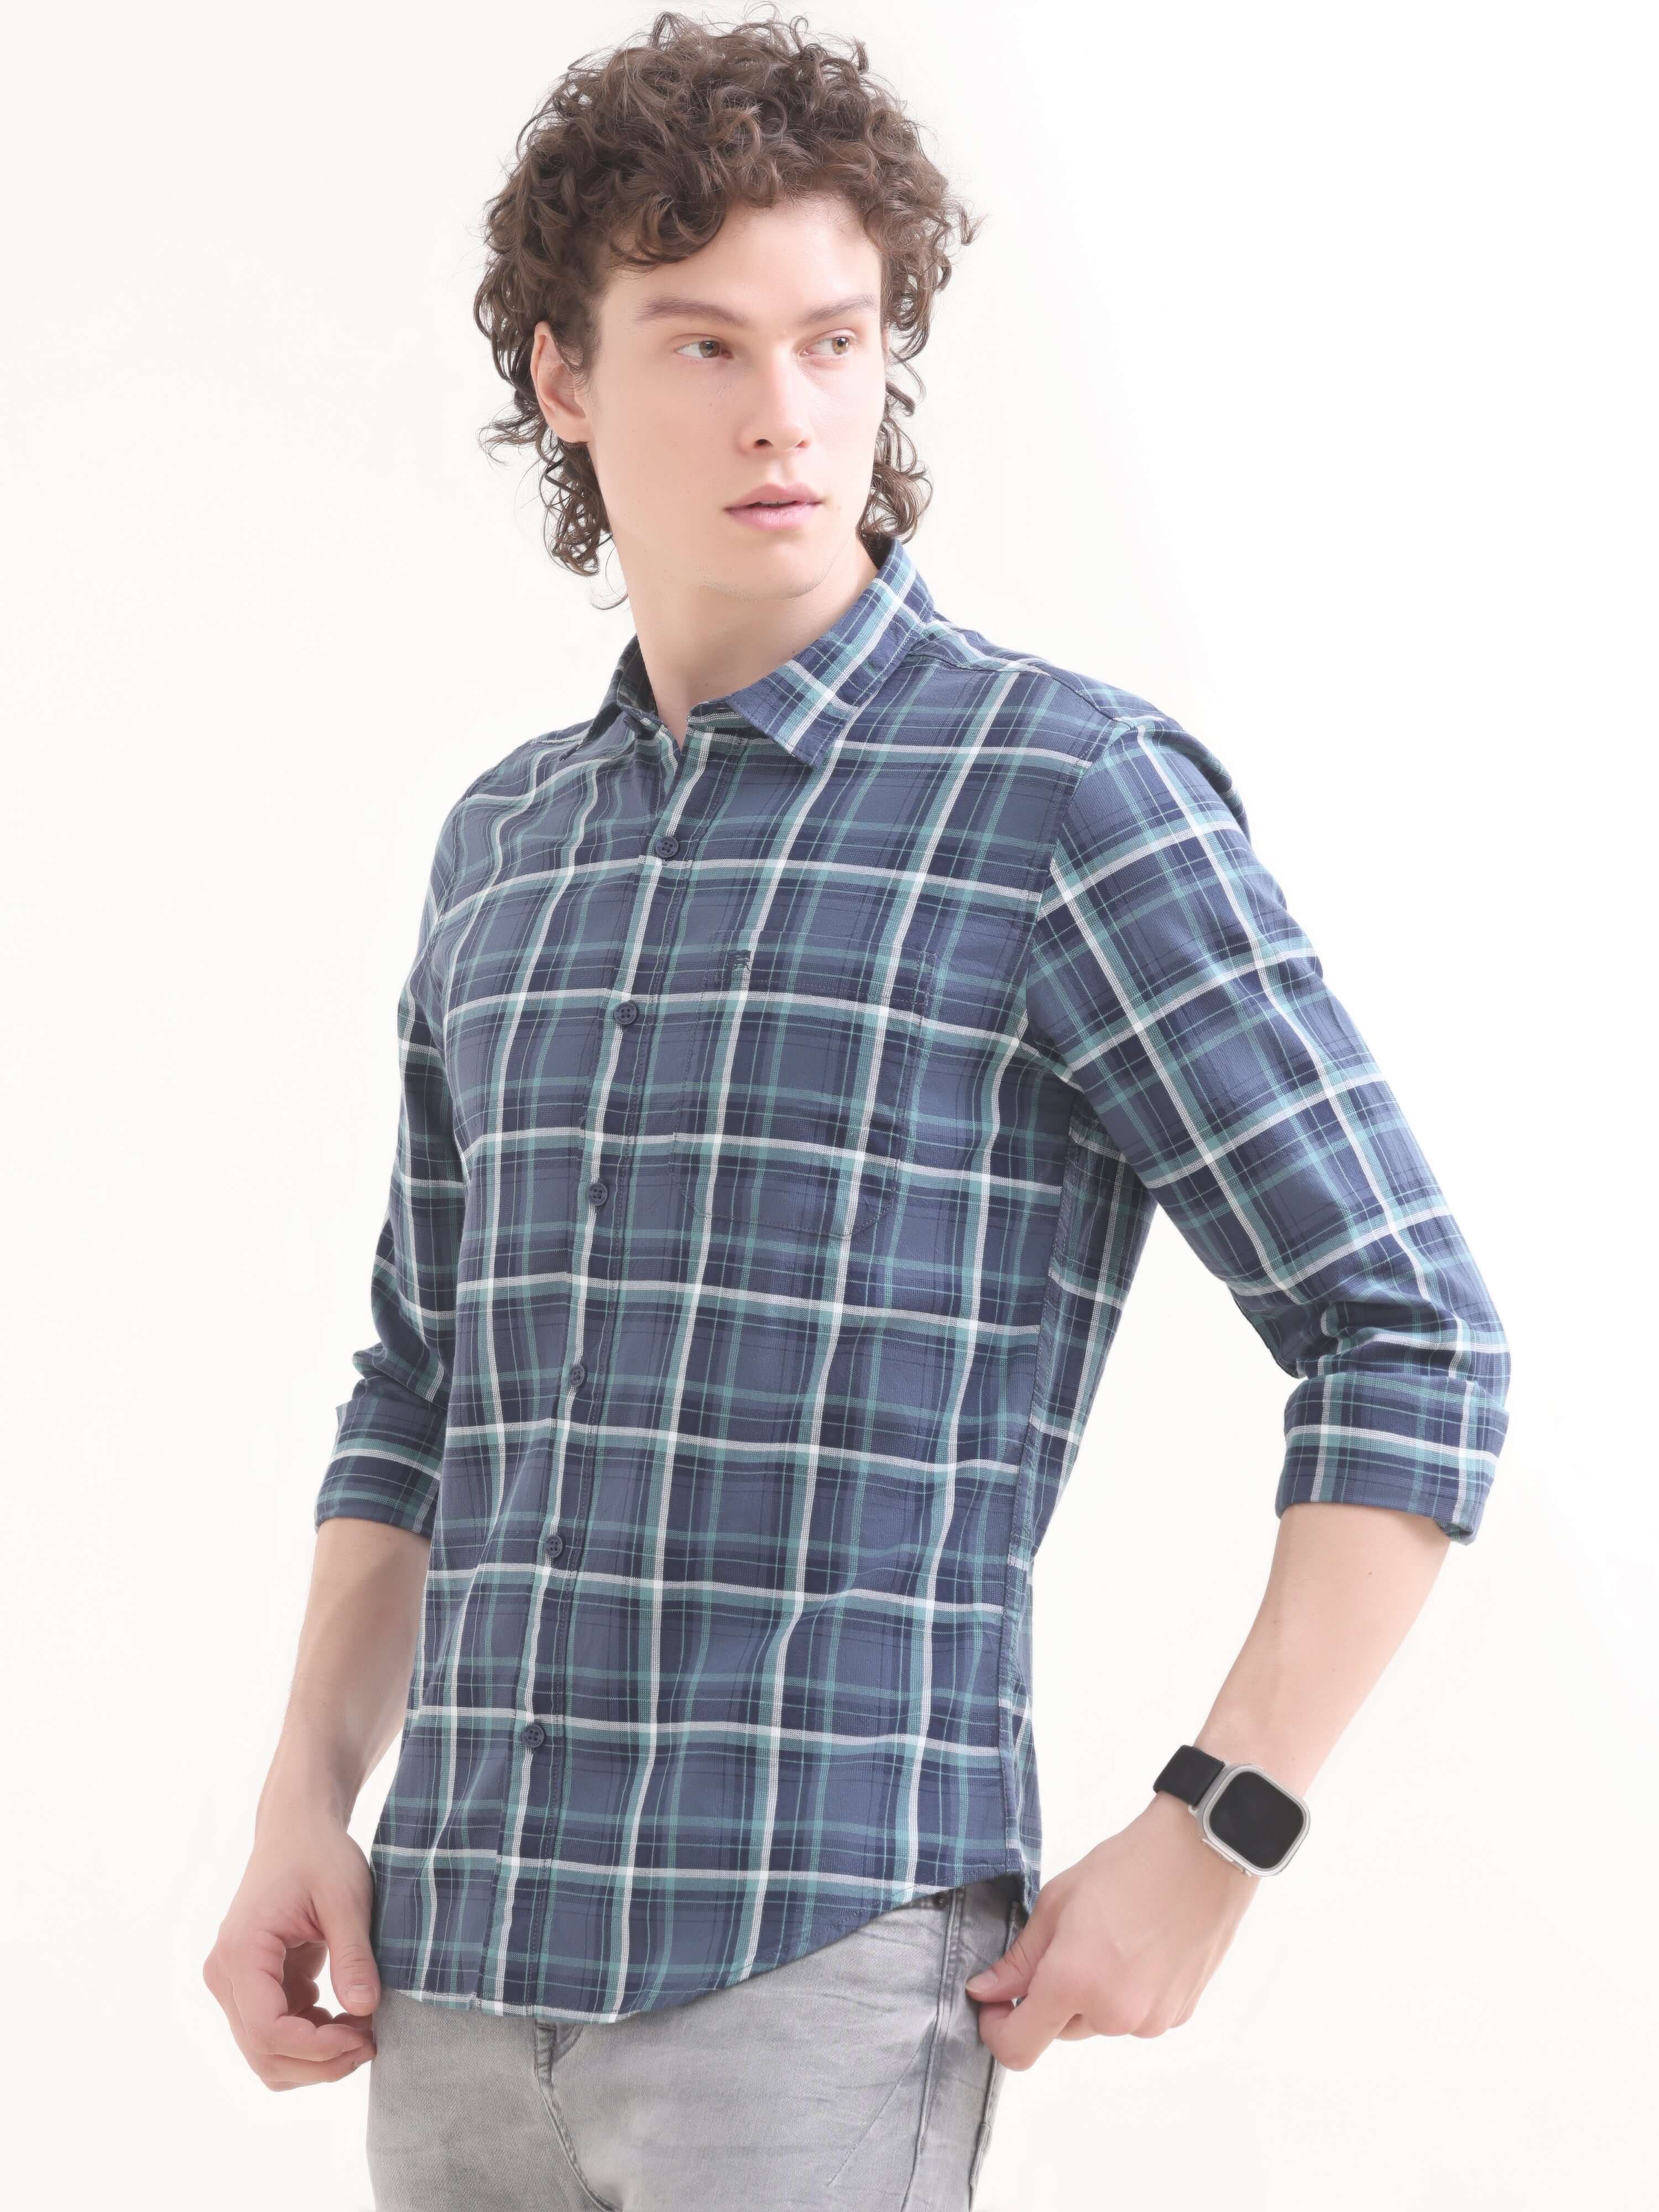 Eaton Blue Windowpane Check Shirt - Summer Style shop online at Estilocus. Elevate your look with the Eaton blue check shirt. Ideal for any summer event, our new arrival guarantees a sharp, casual sophistication.